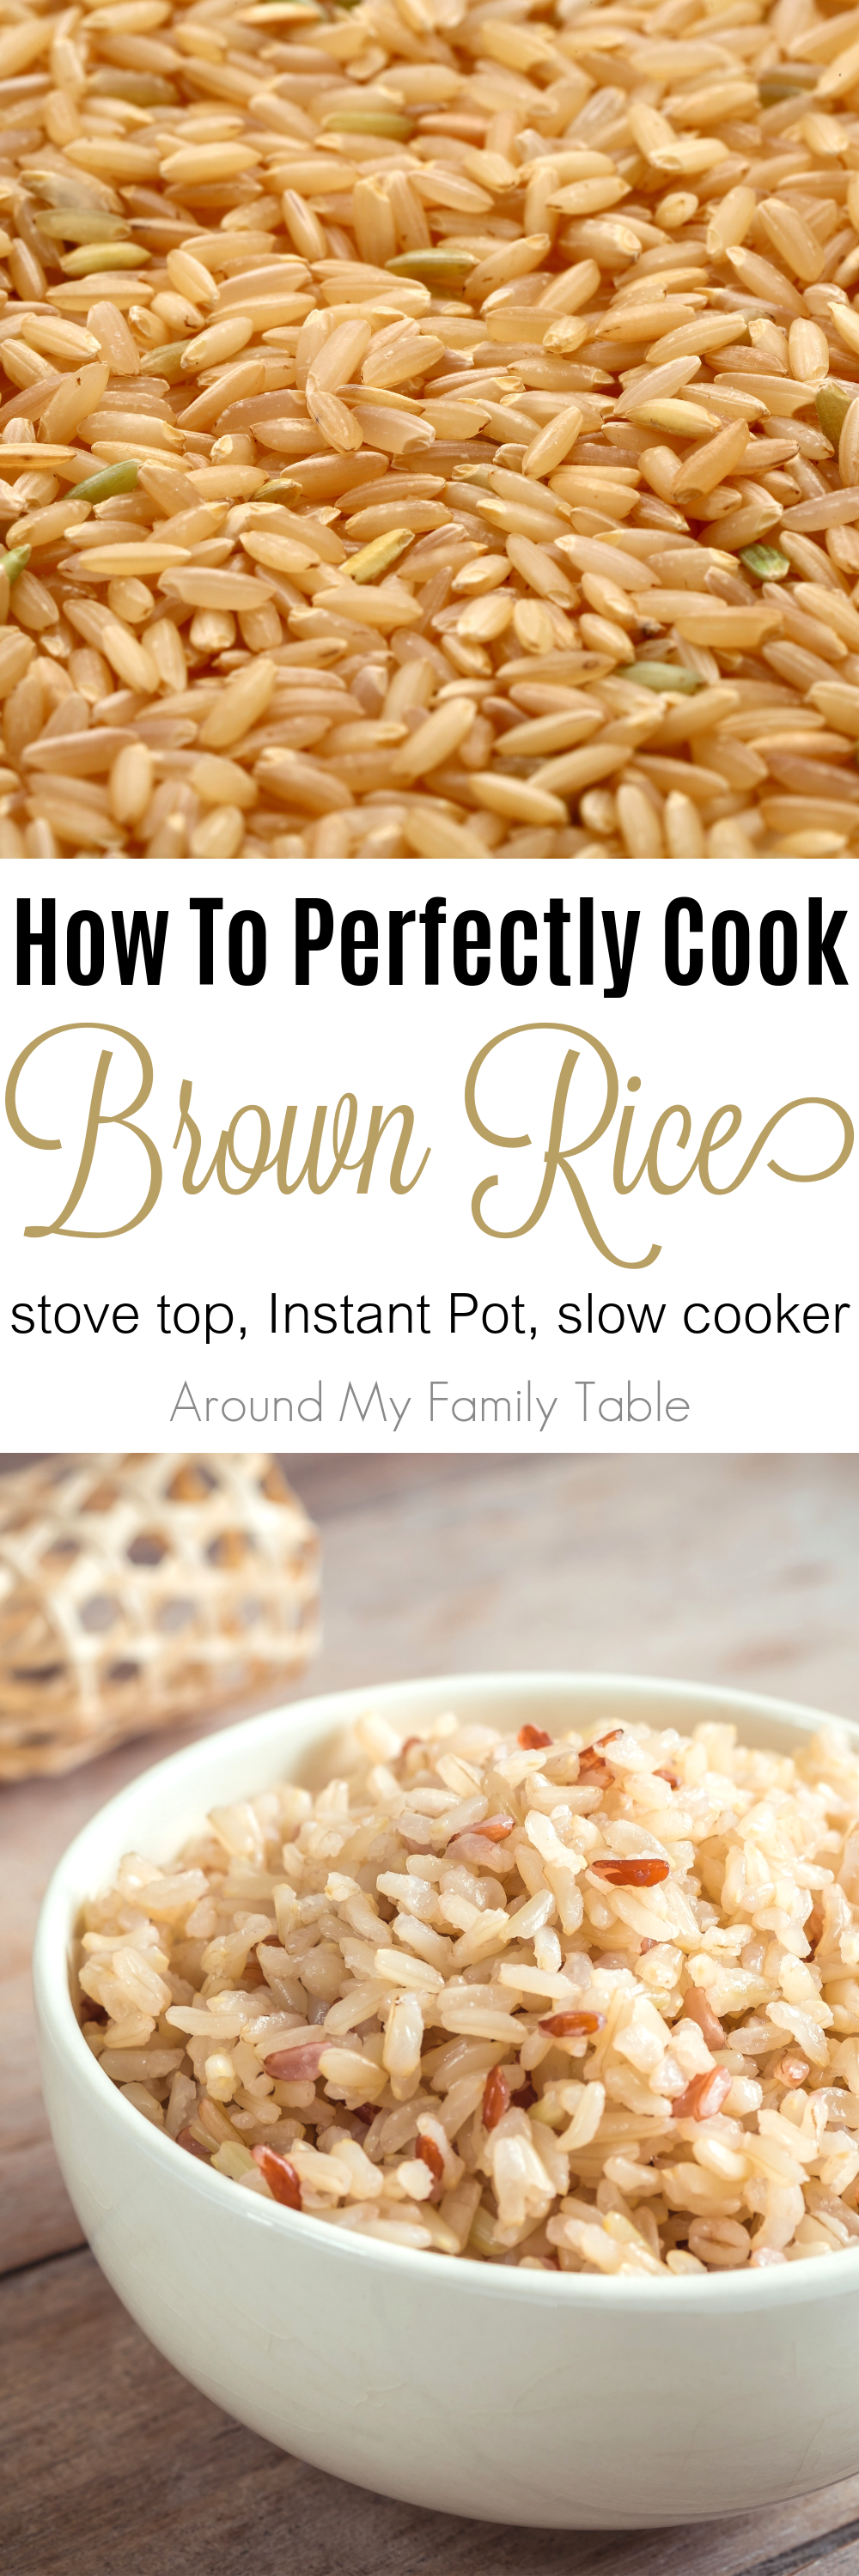 The best brown rice recipe is easy, yet delicious.  It has its own flavor, so I like to keep it simple and depending on how fast I need supper on the table determines how I prepare it.  via @slingmama